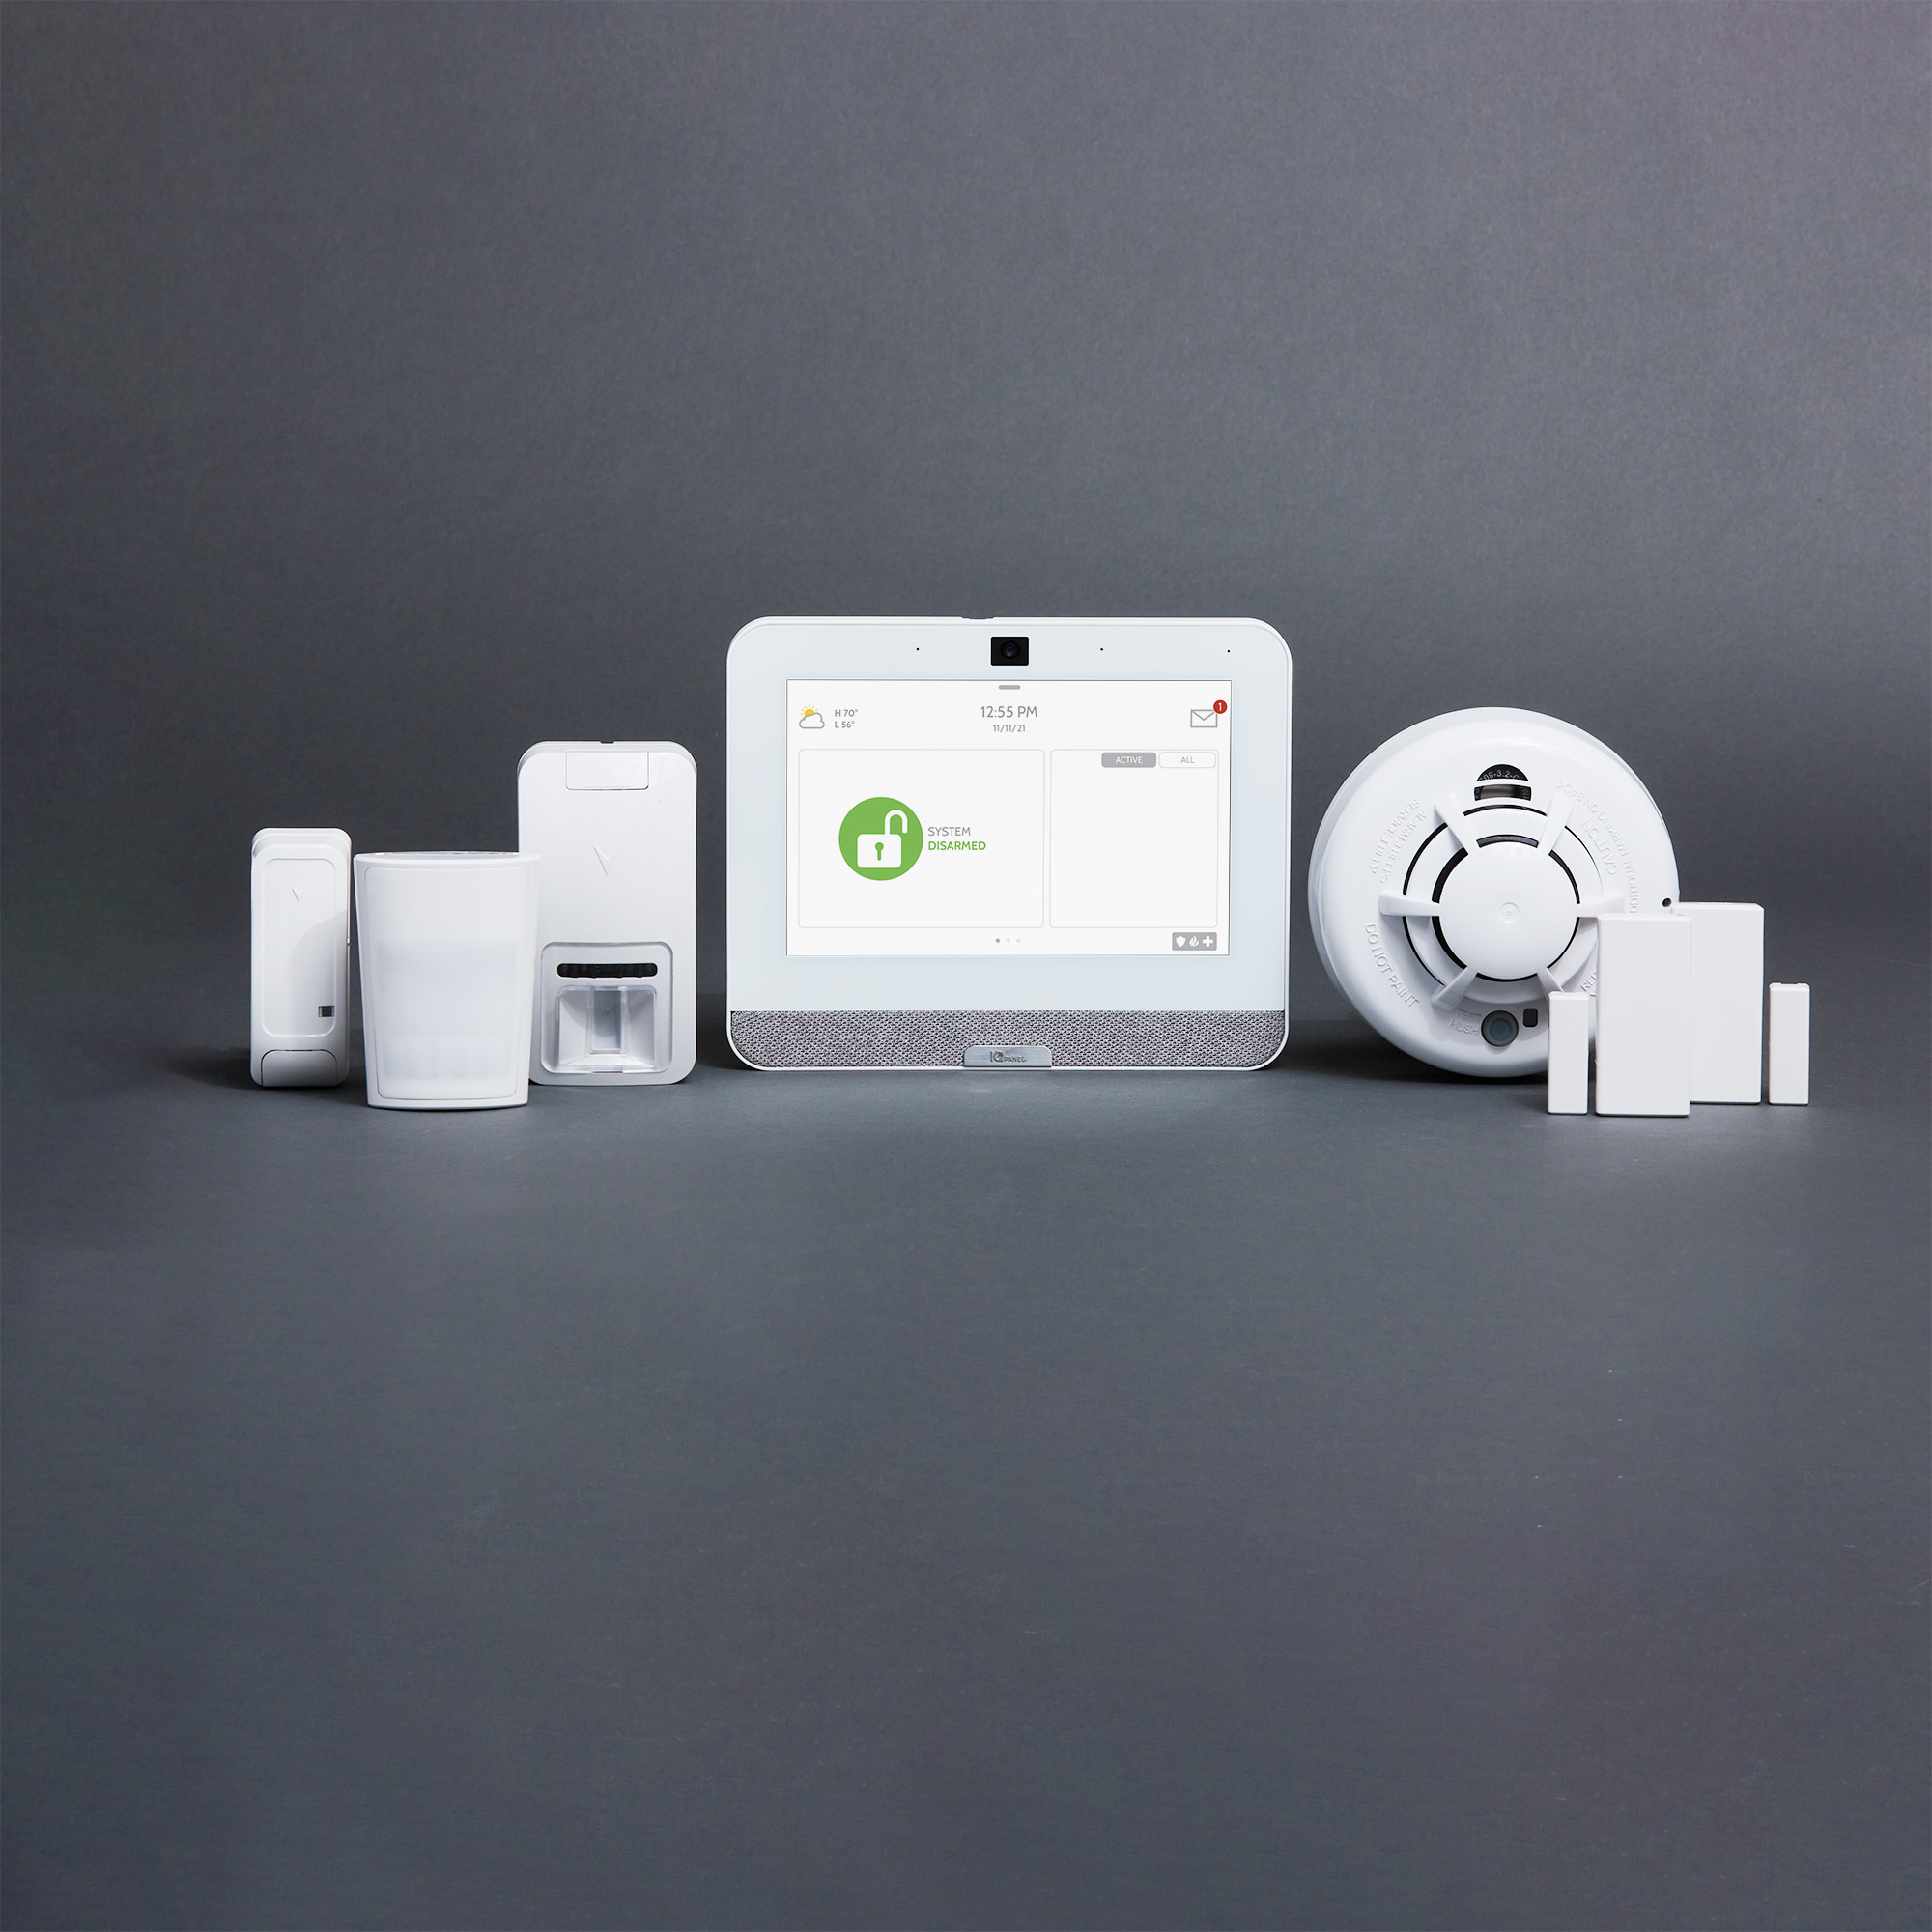 Home Security System with sensors, detectors, devices and touch panel